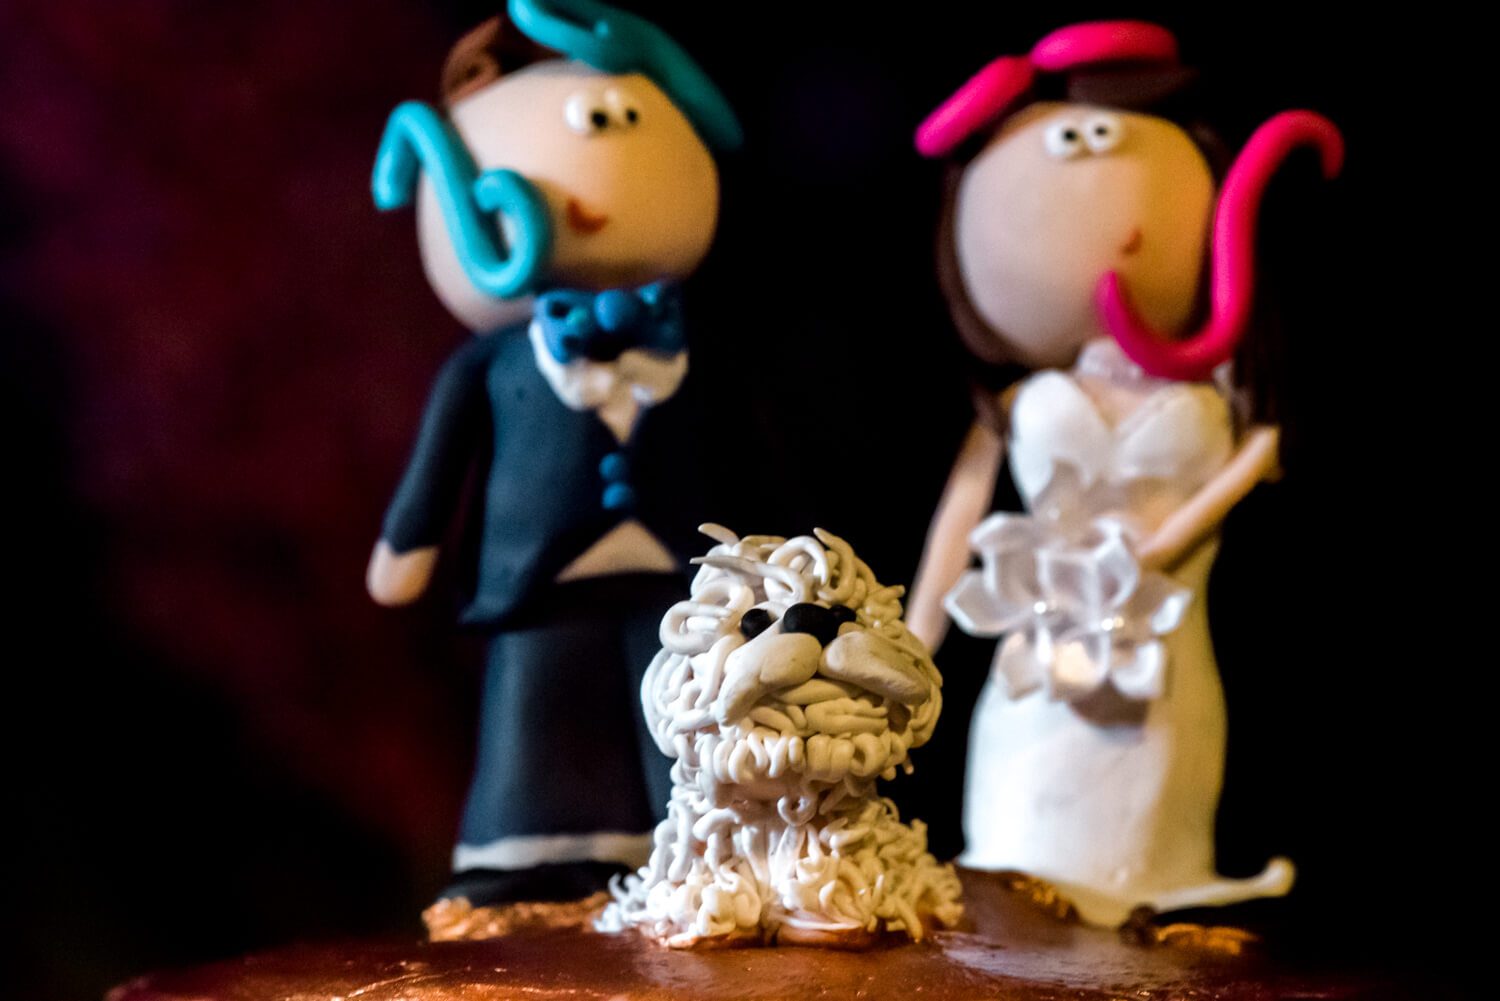 Key West Wedding Photographer - Freas Photography captures Wendy & Michael with their dog on their wedding cake.